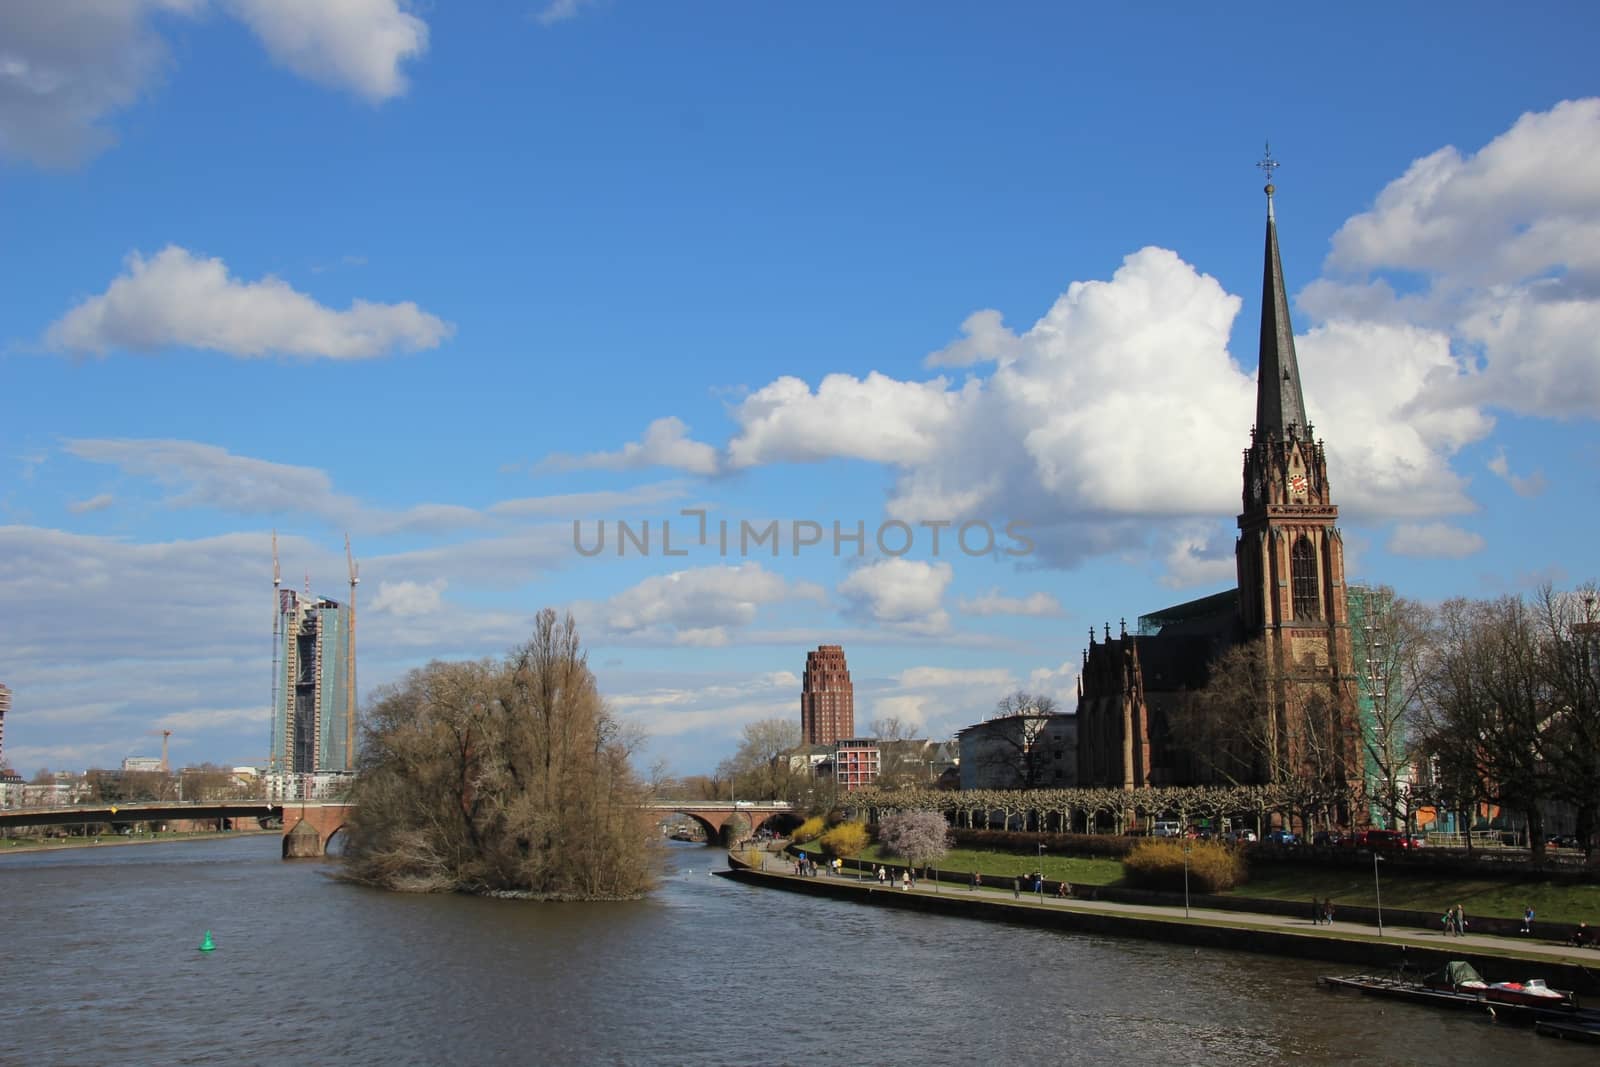 Looking down the Main River in Frankfurt, Germany